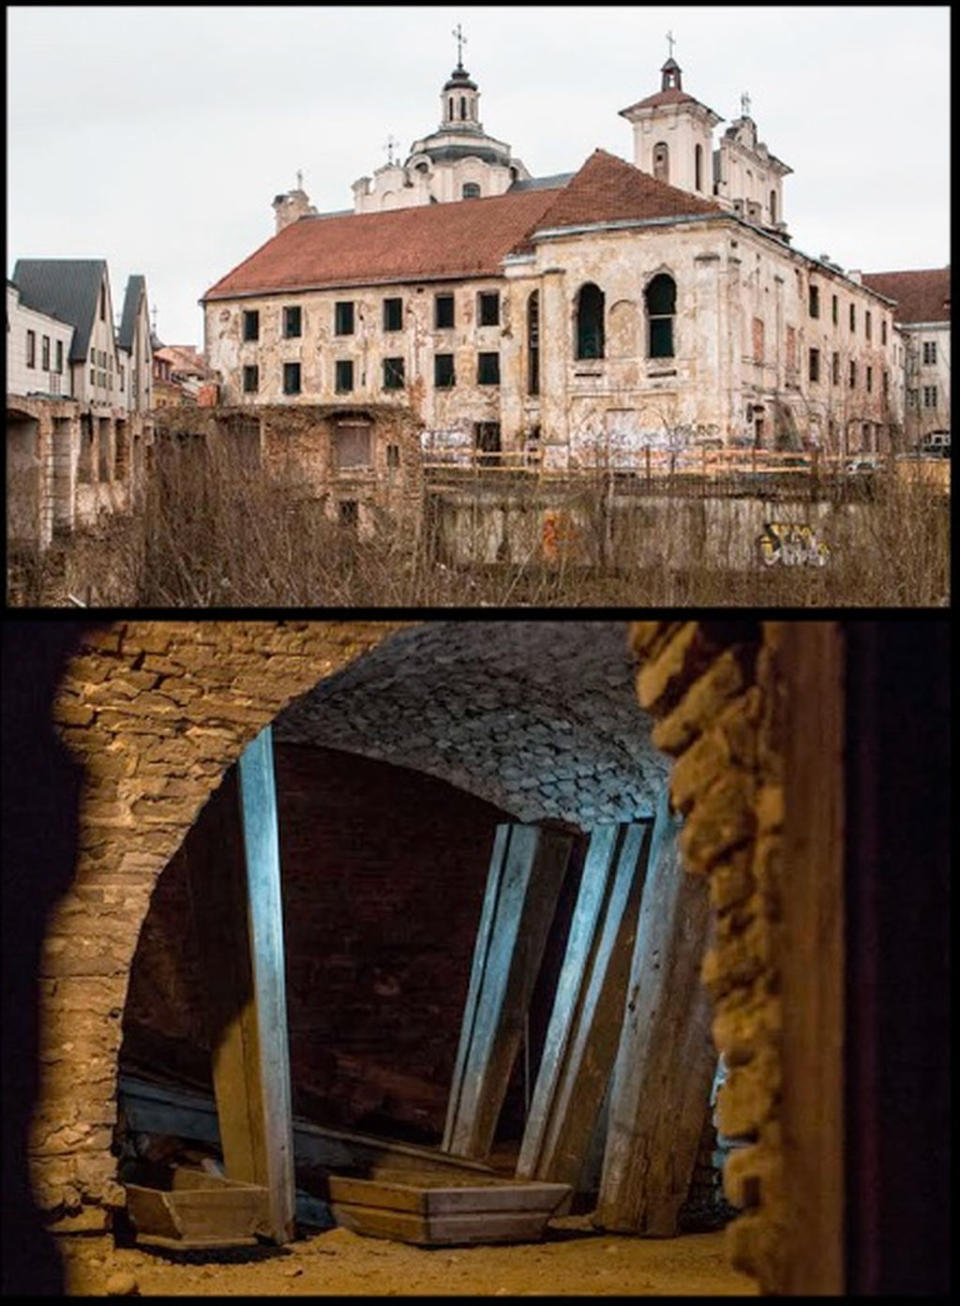 The Dominican Church of the Holy Spirit in Vilnius, Lithuania, (top) and the crypt in the church where the child mummy was uncovered (bottom). <cite>Duggan, A.T. <i>et al.</i> Current Biology (2016)</cite>